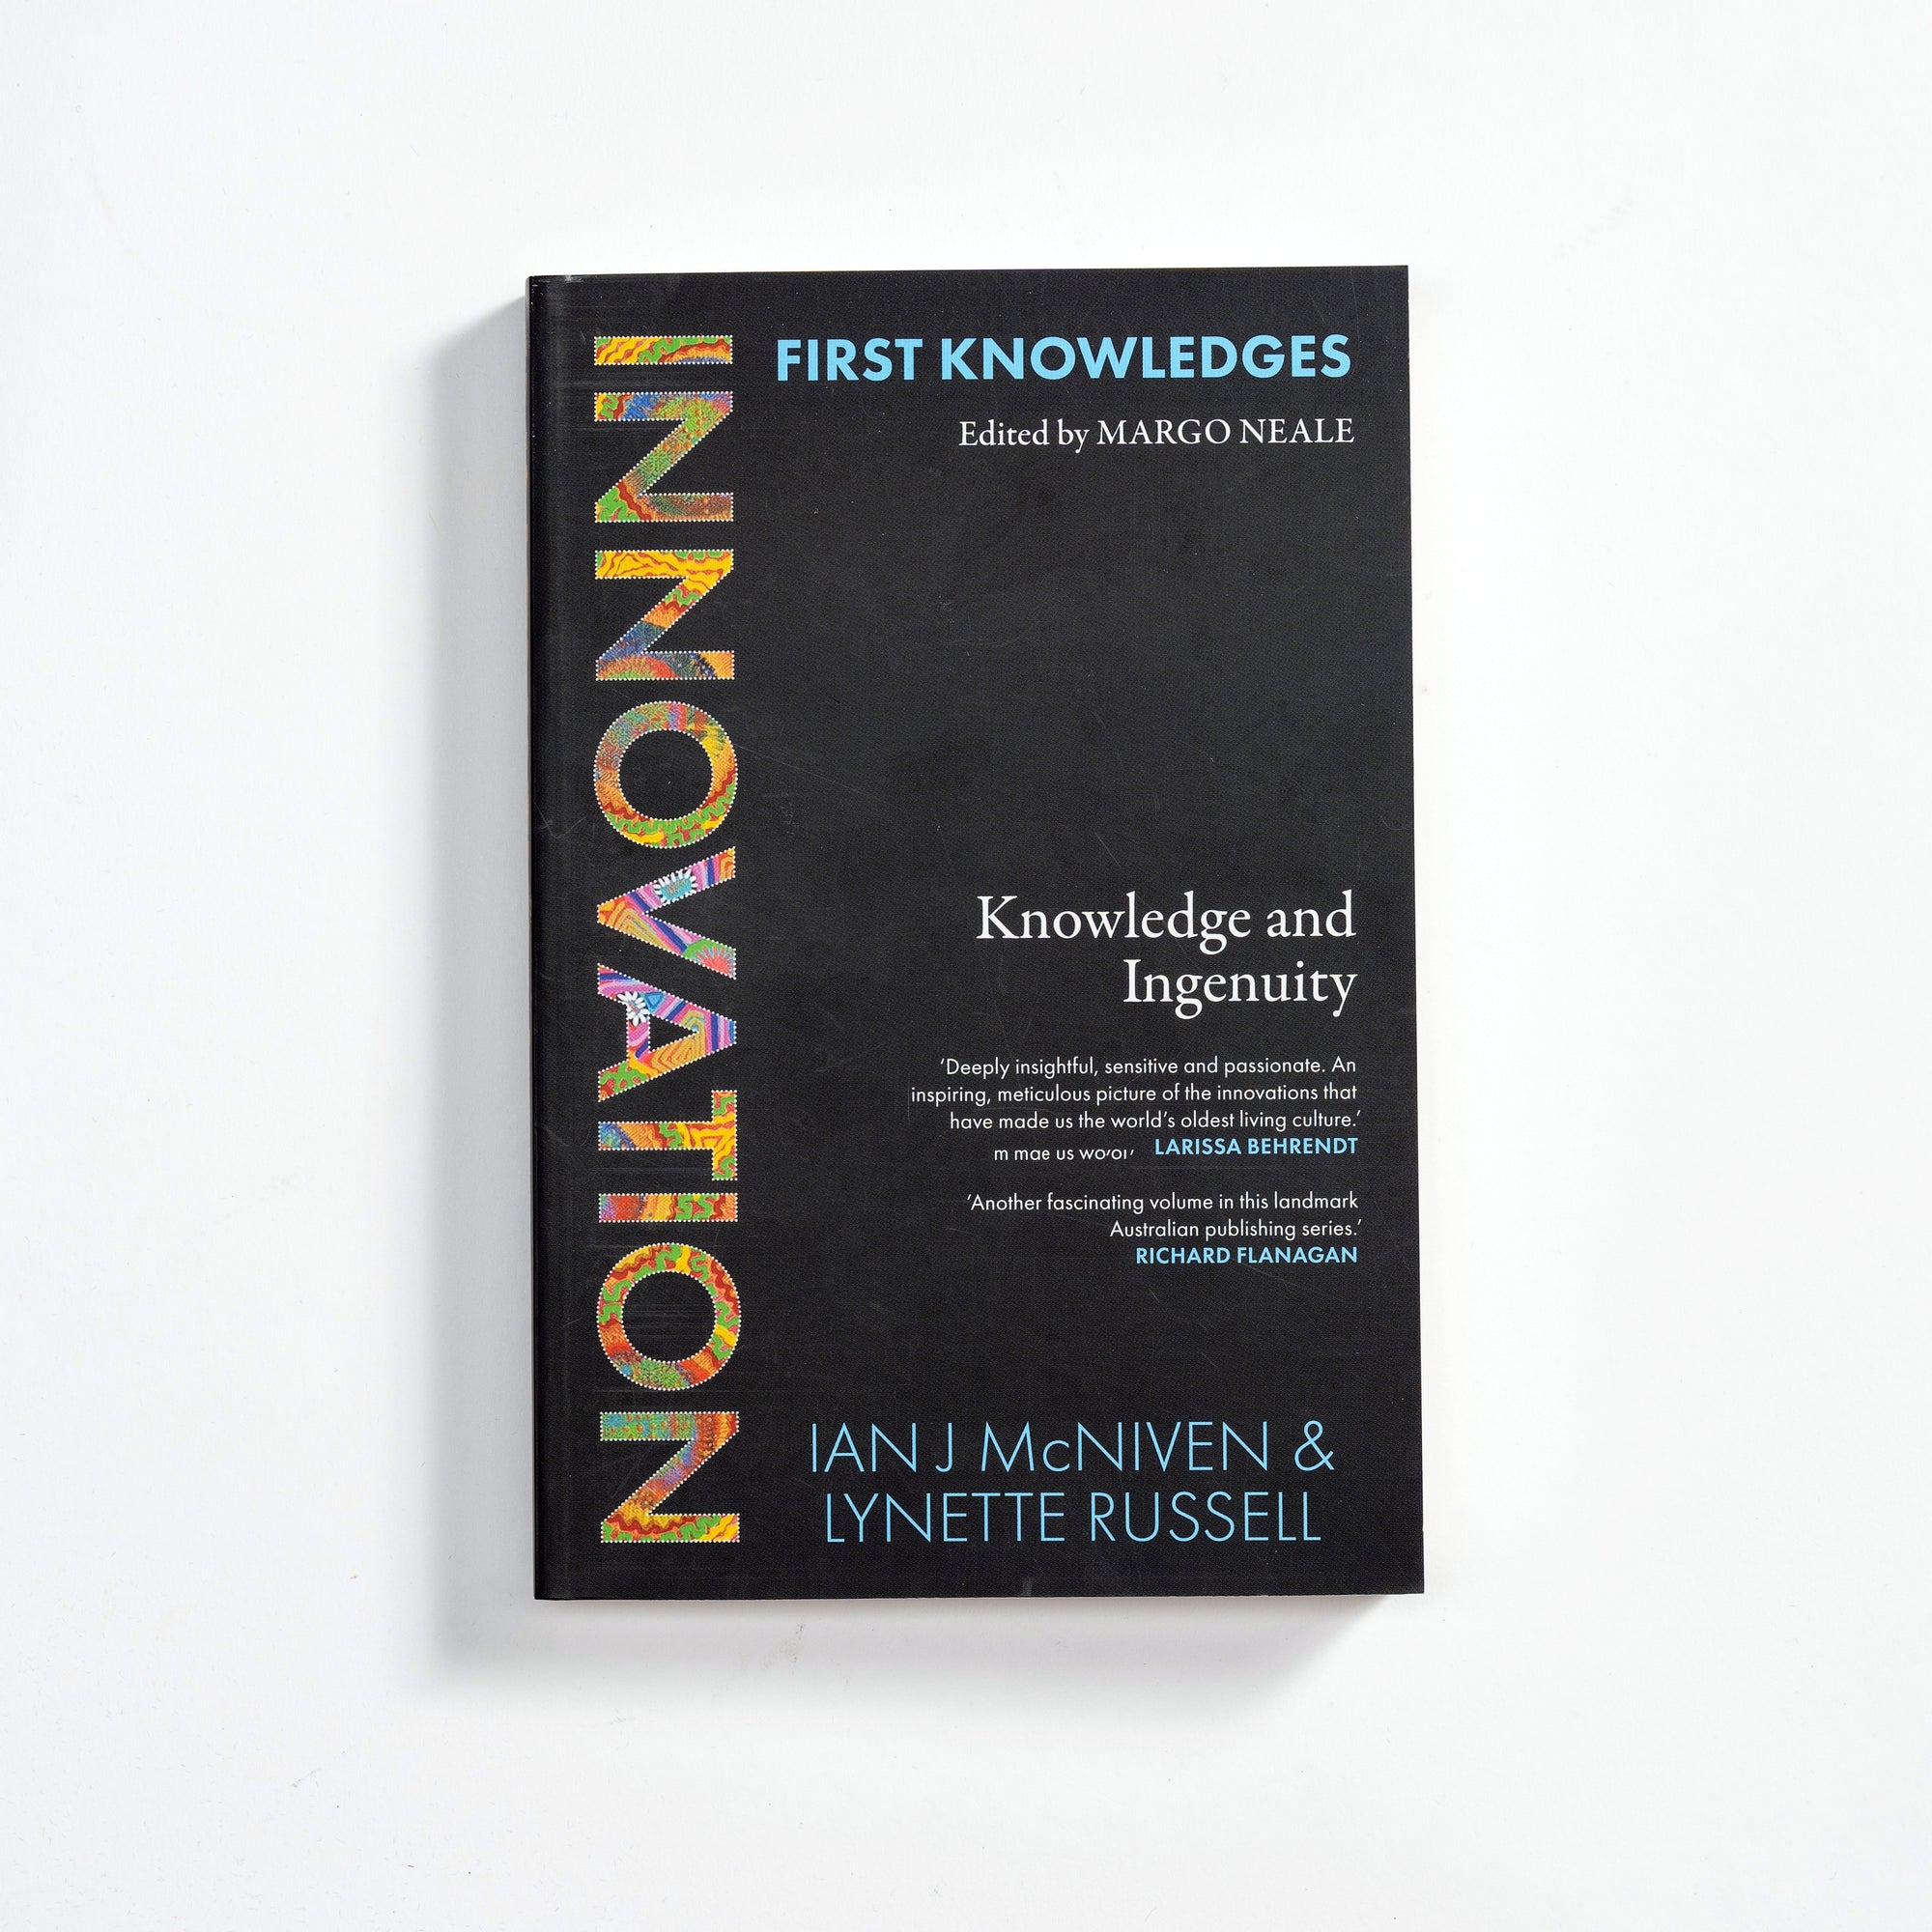 First Knowledges - Innovation